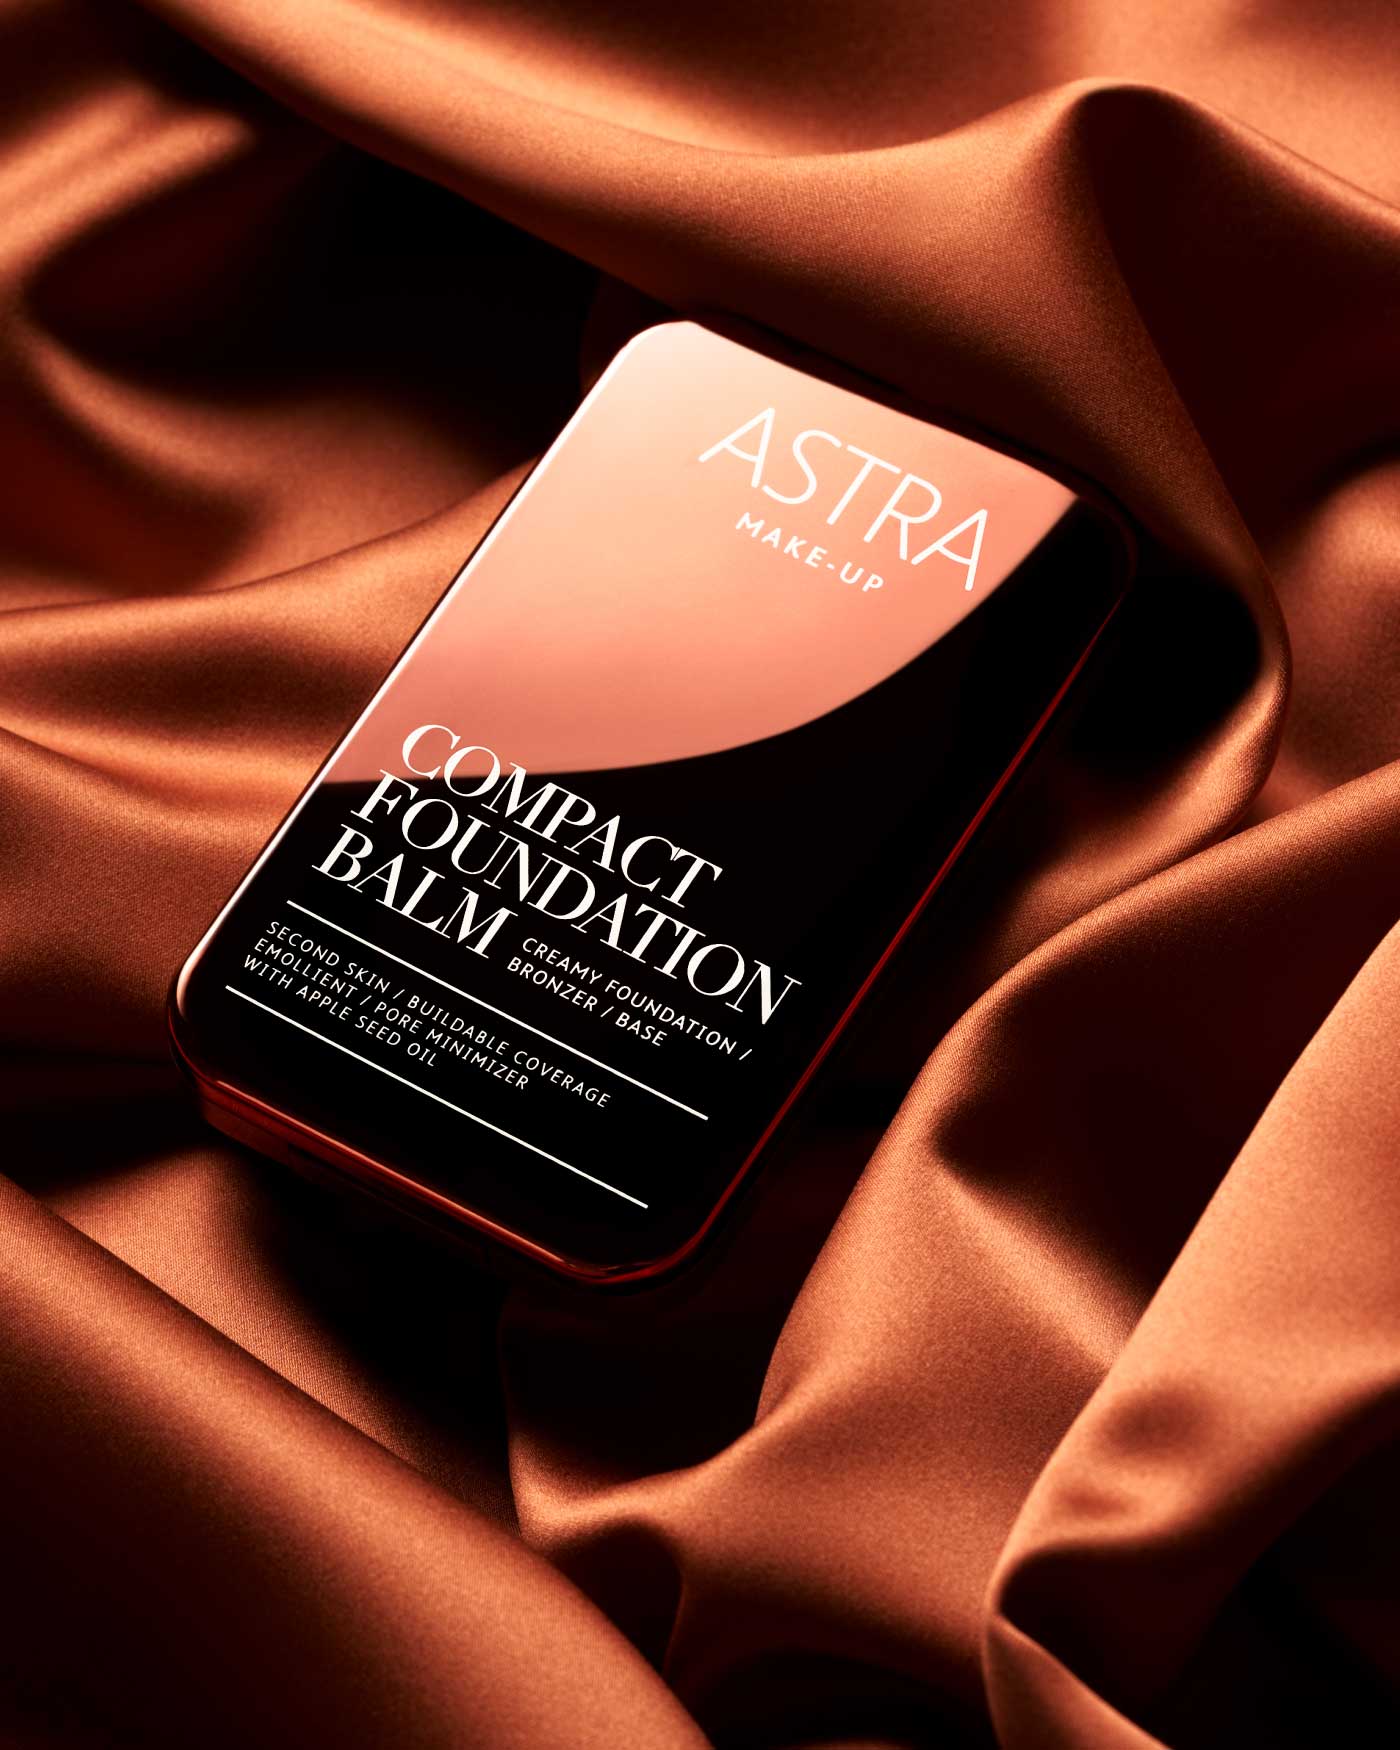 COMPACT FOUNDATION BALM - All Products - Astra Make-Up